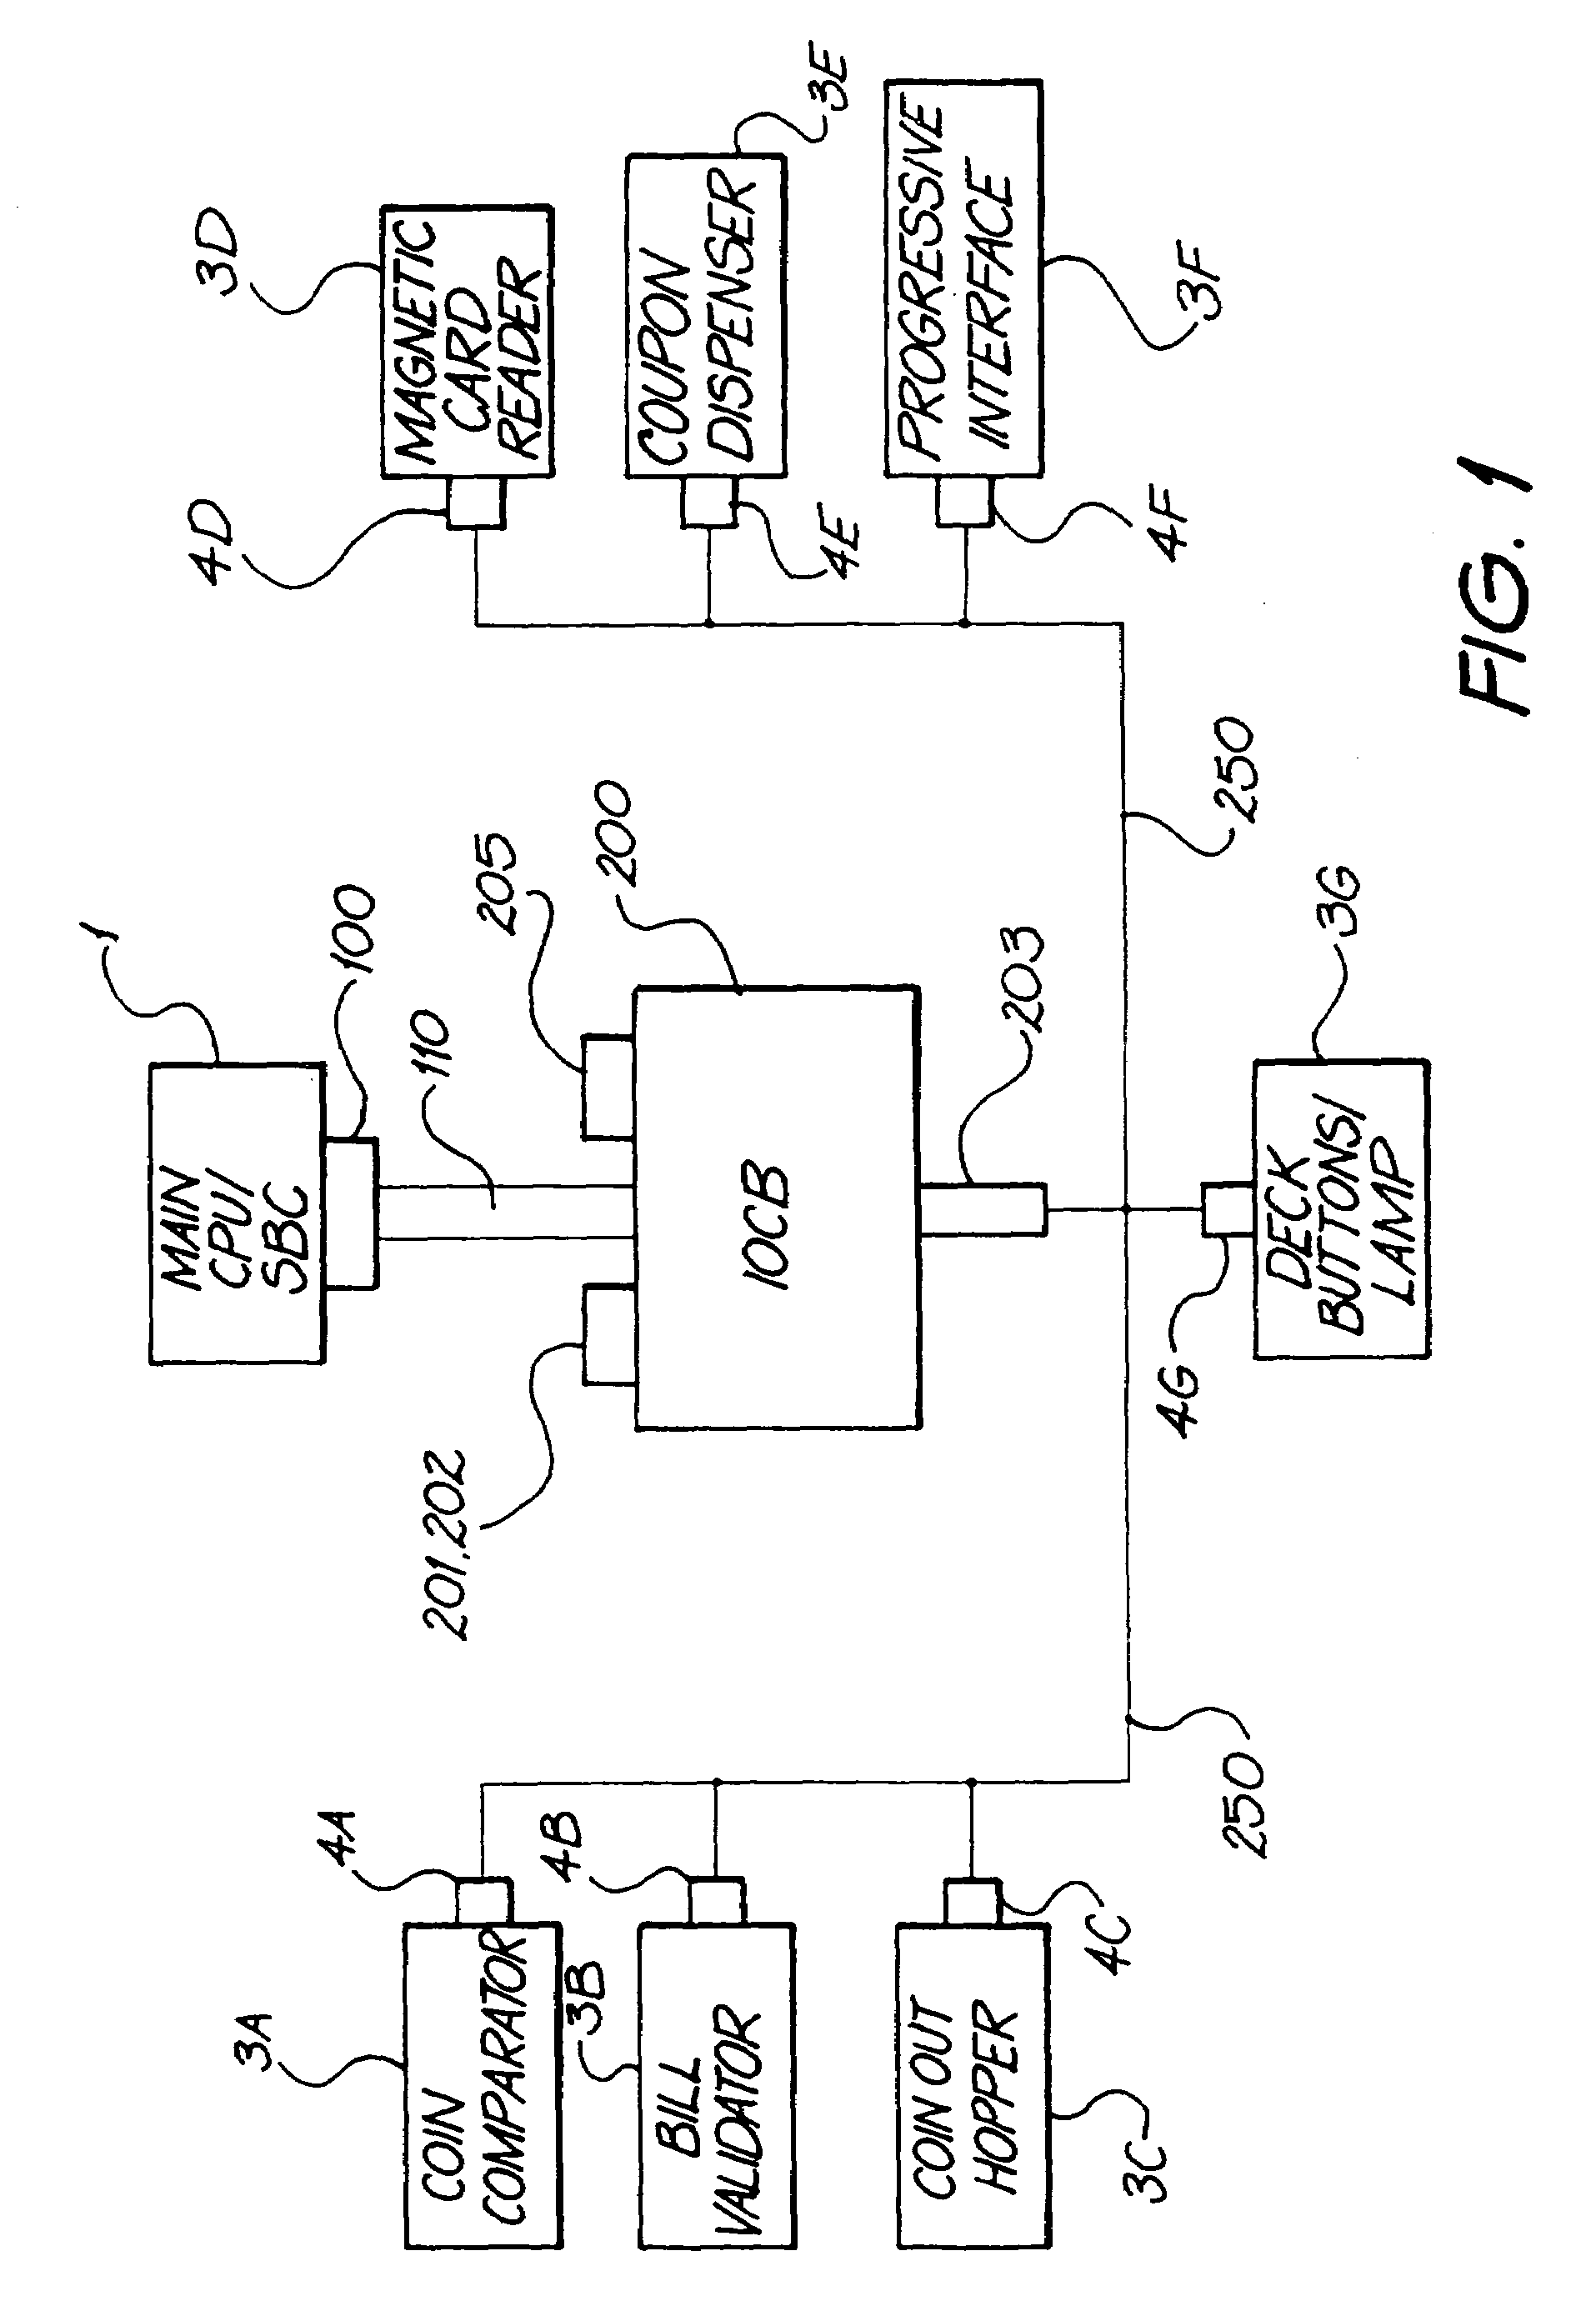 Secured inter-processor and virtual device communications system for use in a gaming system